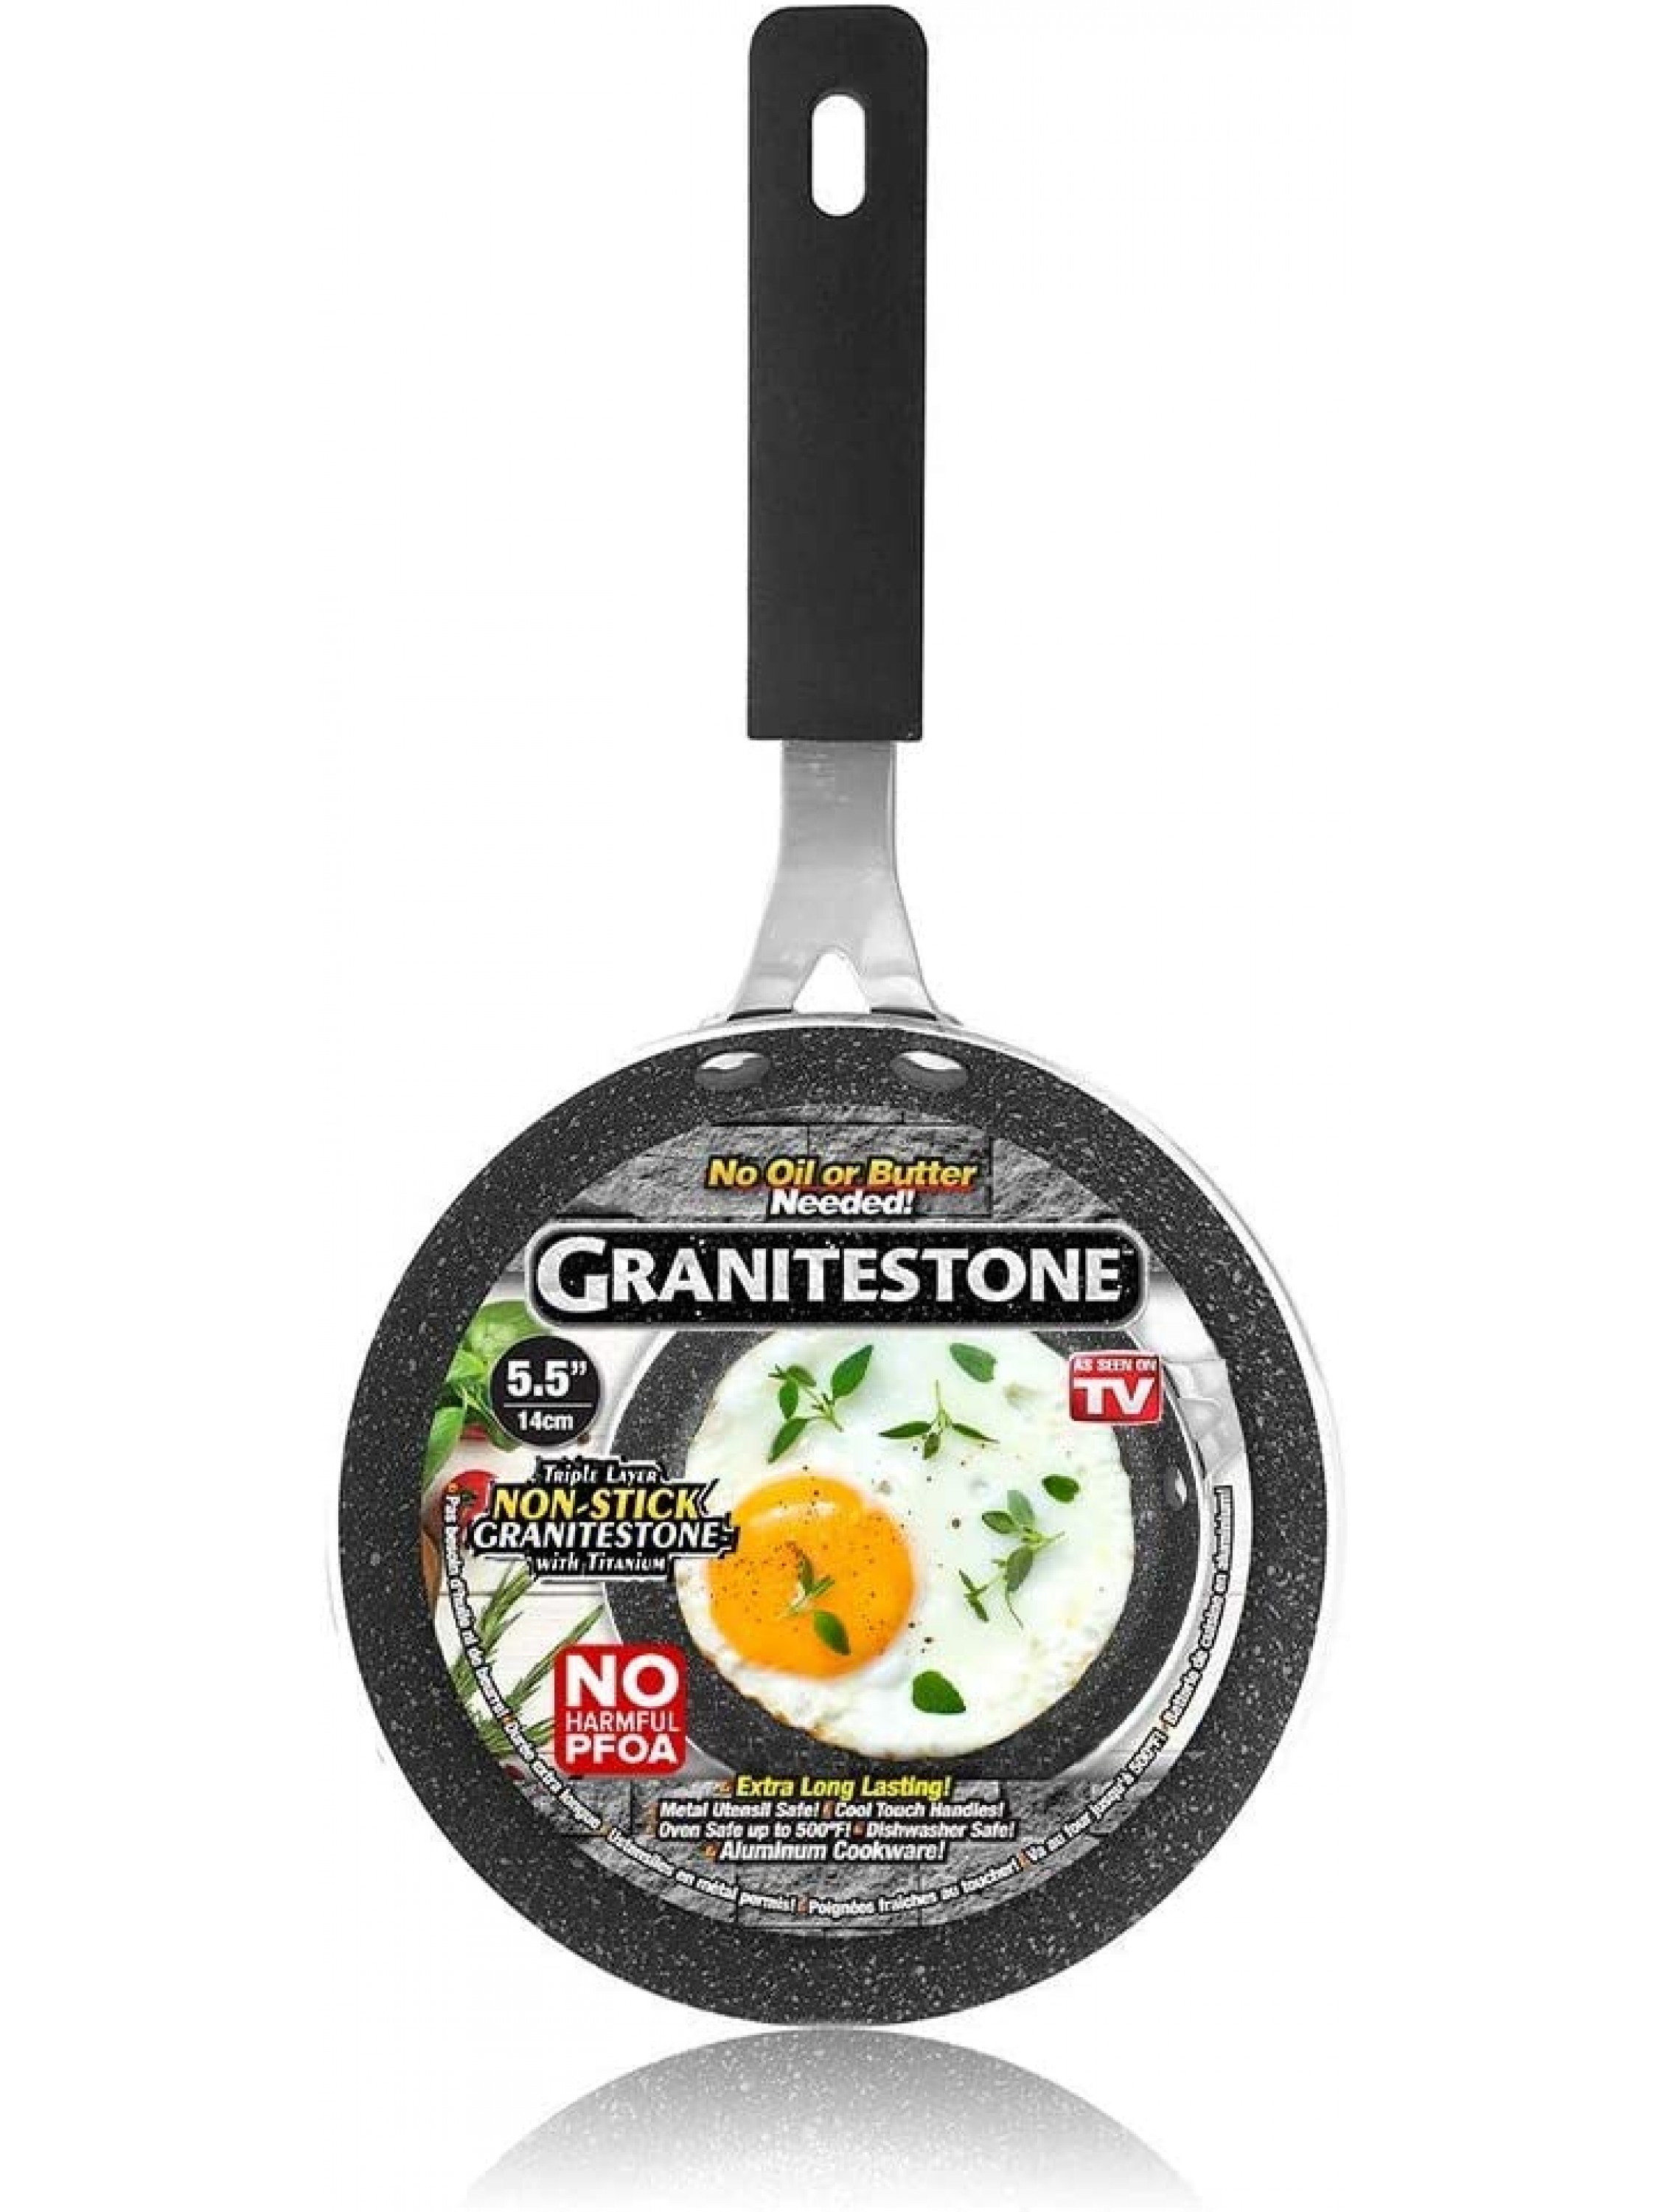 Granitestone Egg Pan 5.5 inches Nonstick Novelty-Sized Eggpan Omelet Pan with Rubber Grip Heat-Proof Handle Egg Frying Pan Dishwasher and Oven Safe Breakfast Pan PFOA-Free Fry Pan As Seen On TV - B9O3ZUGL0